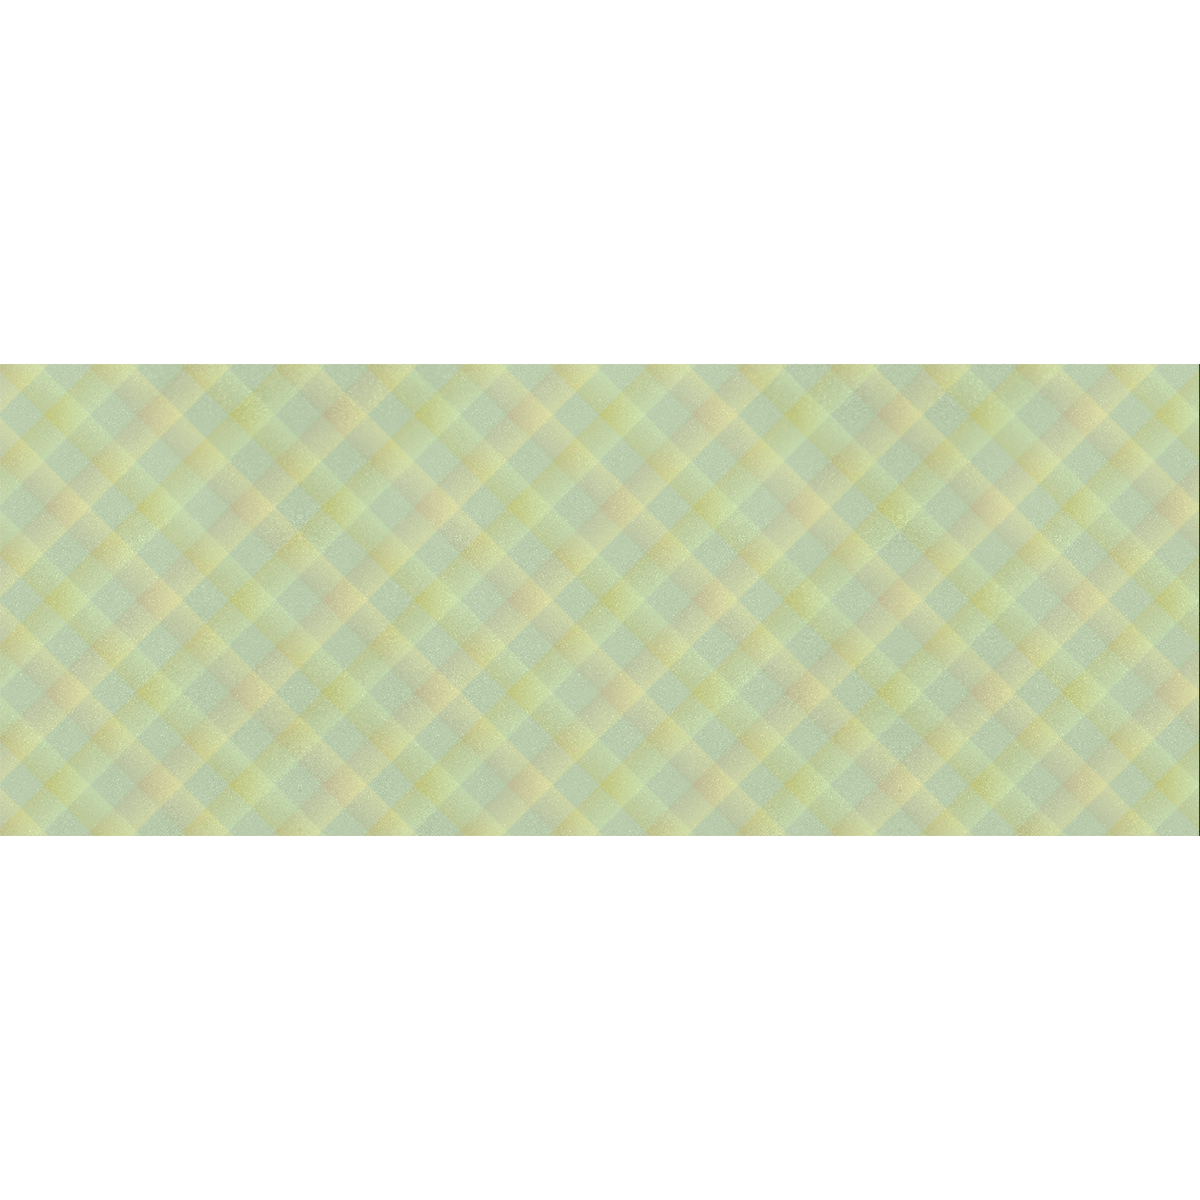 Pastel Lime Orange Crisscross Stripes Gift Wrapping Paper 58"x 23" (1 Roll)